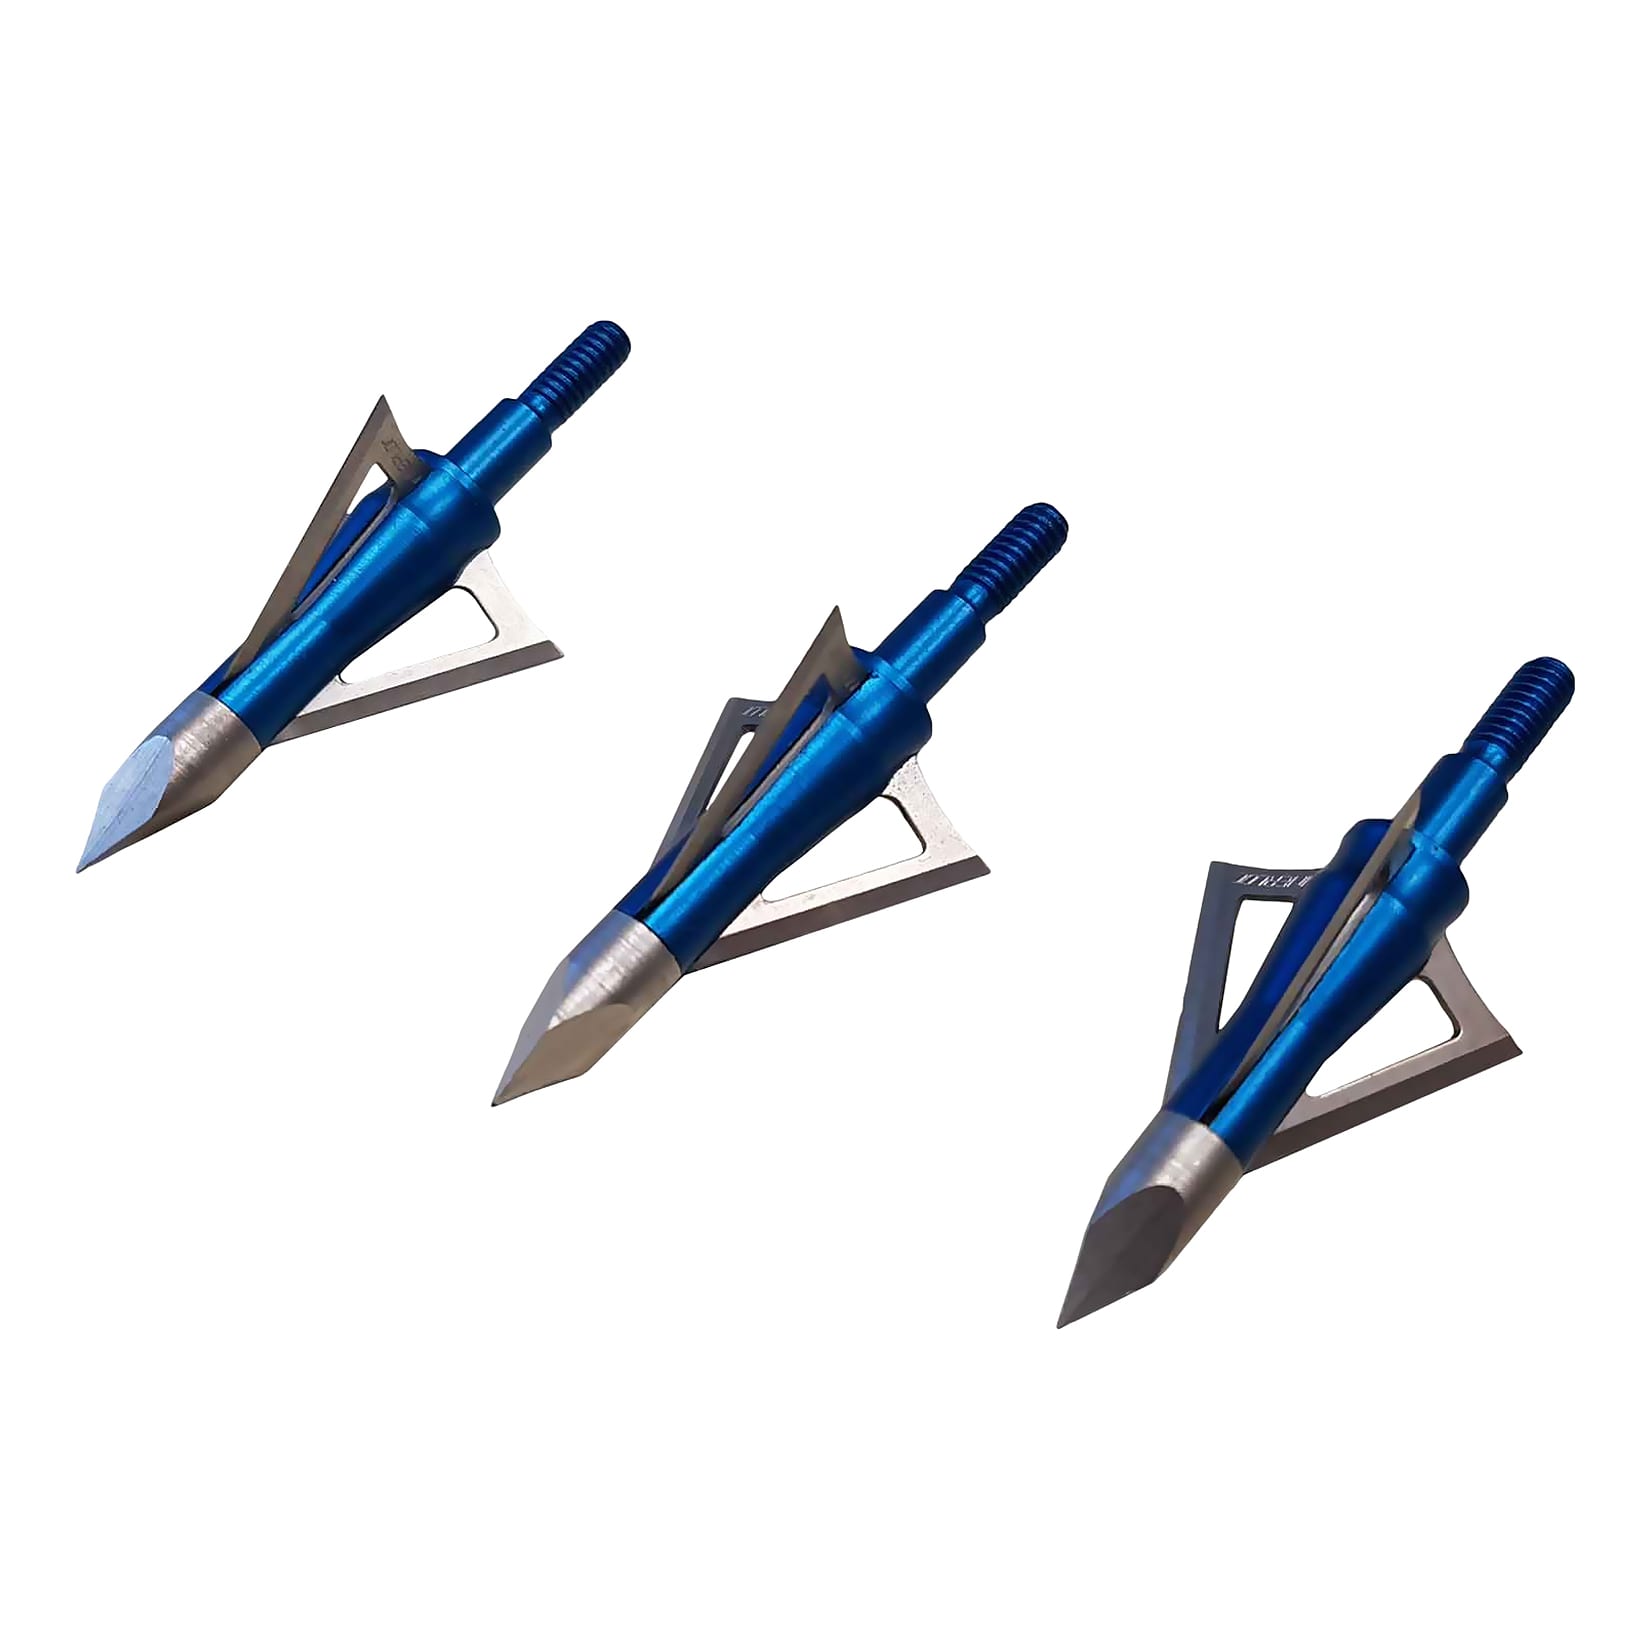 Excalibur Boltcutter 100 Crossbow Broadheads